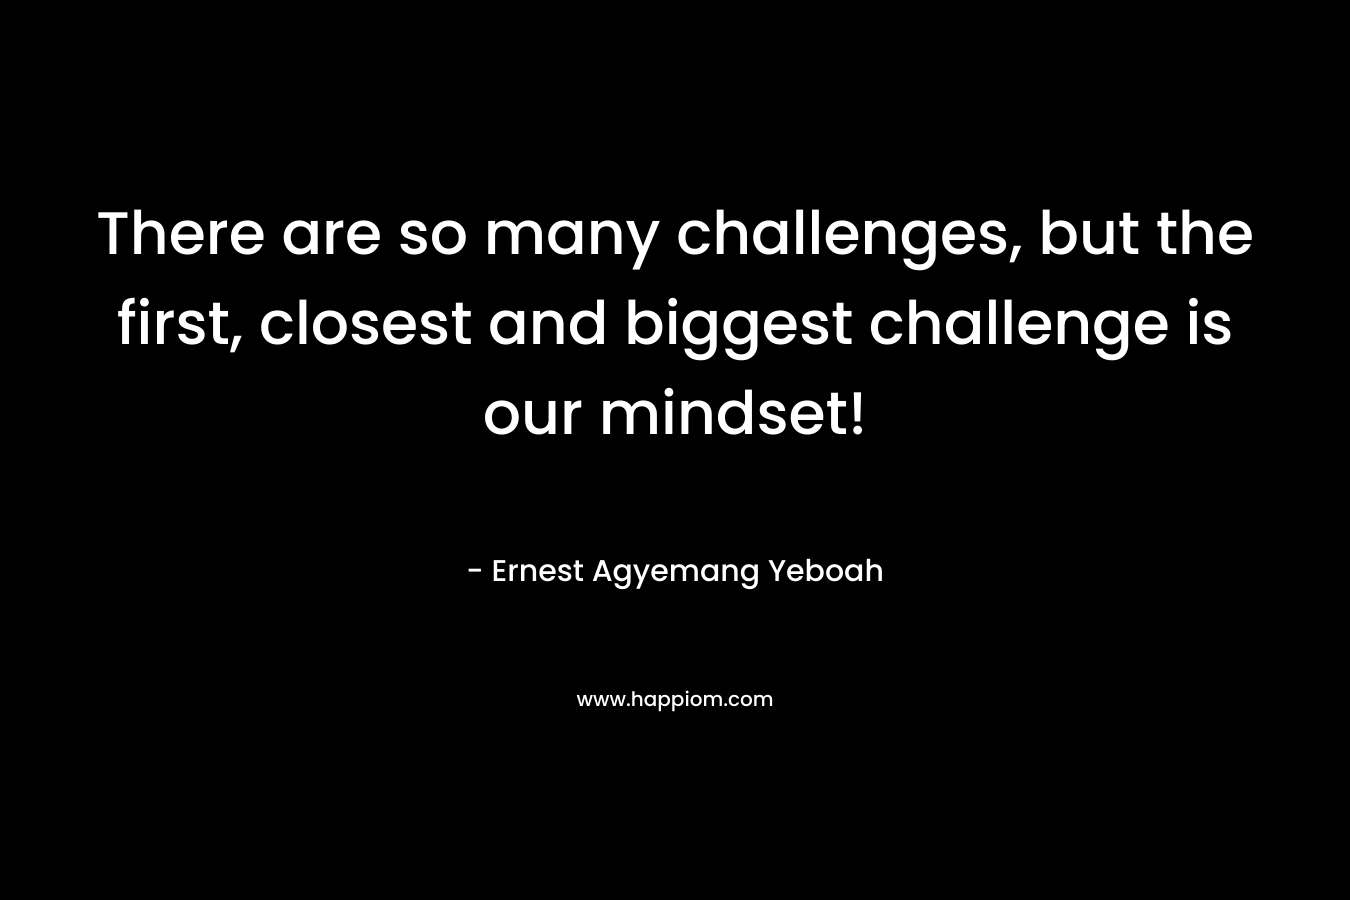 There are so many challenges, but the first, closest and biggest challenge is our mindset!